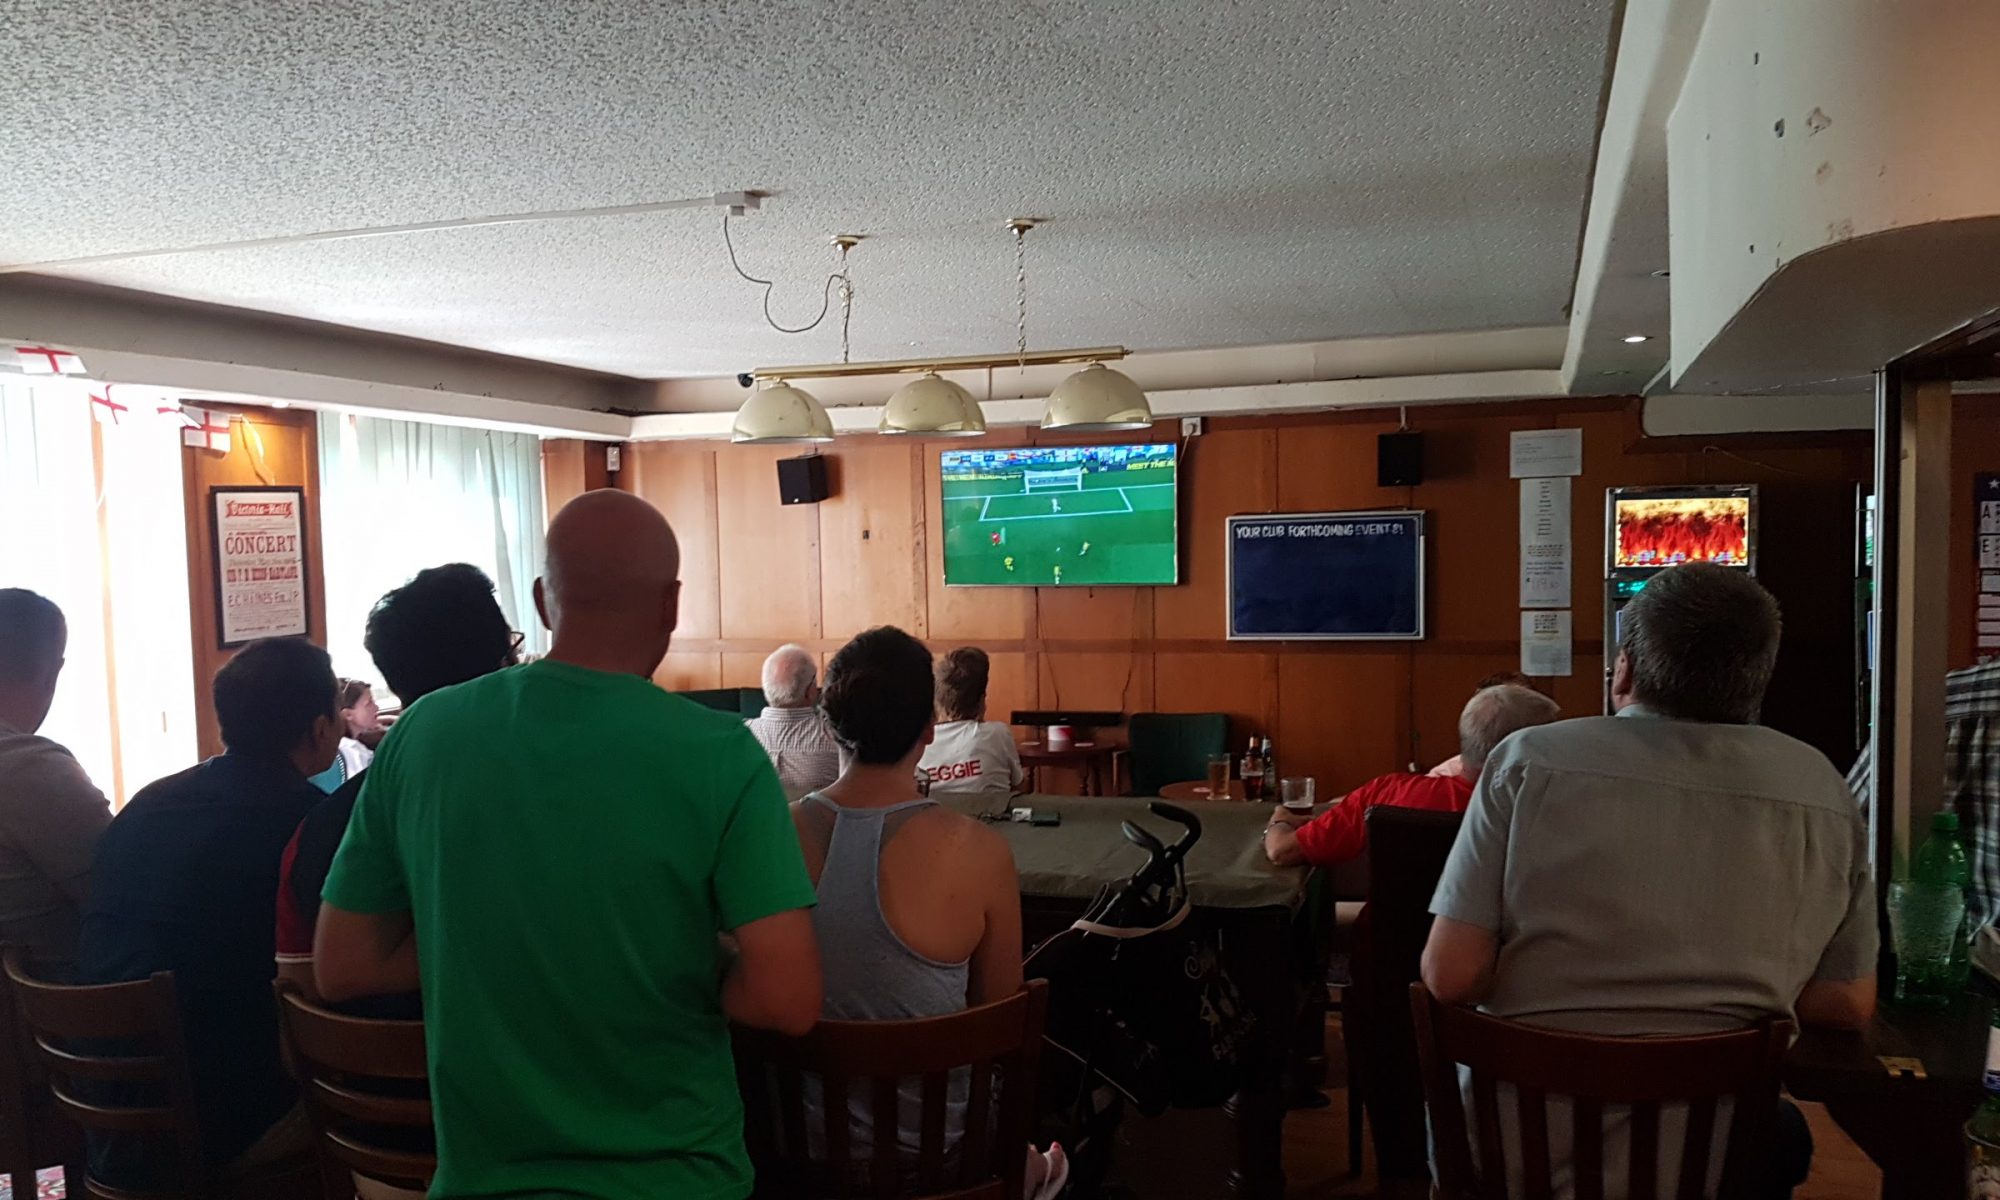 Supporting England In The World Cup 2018